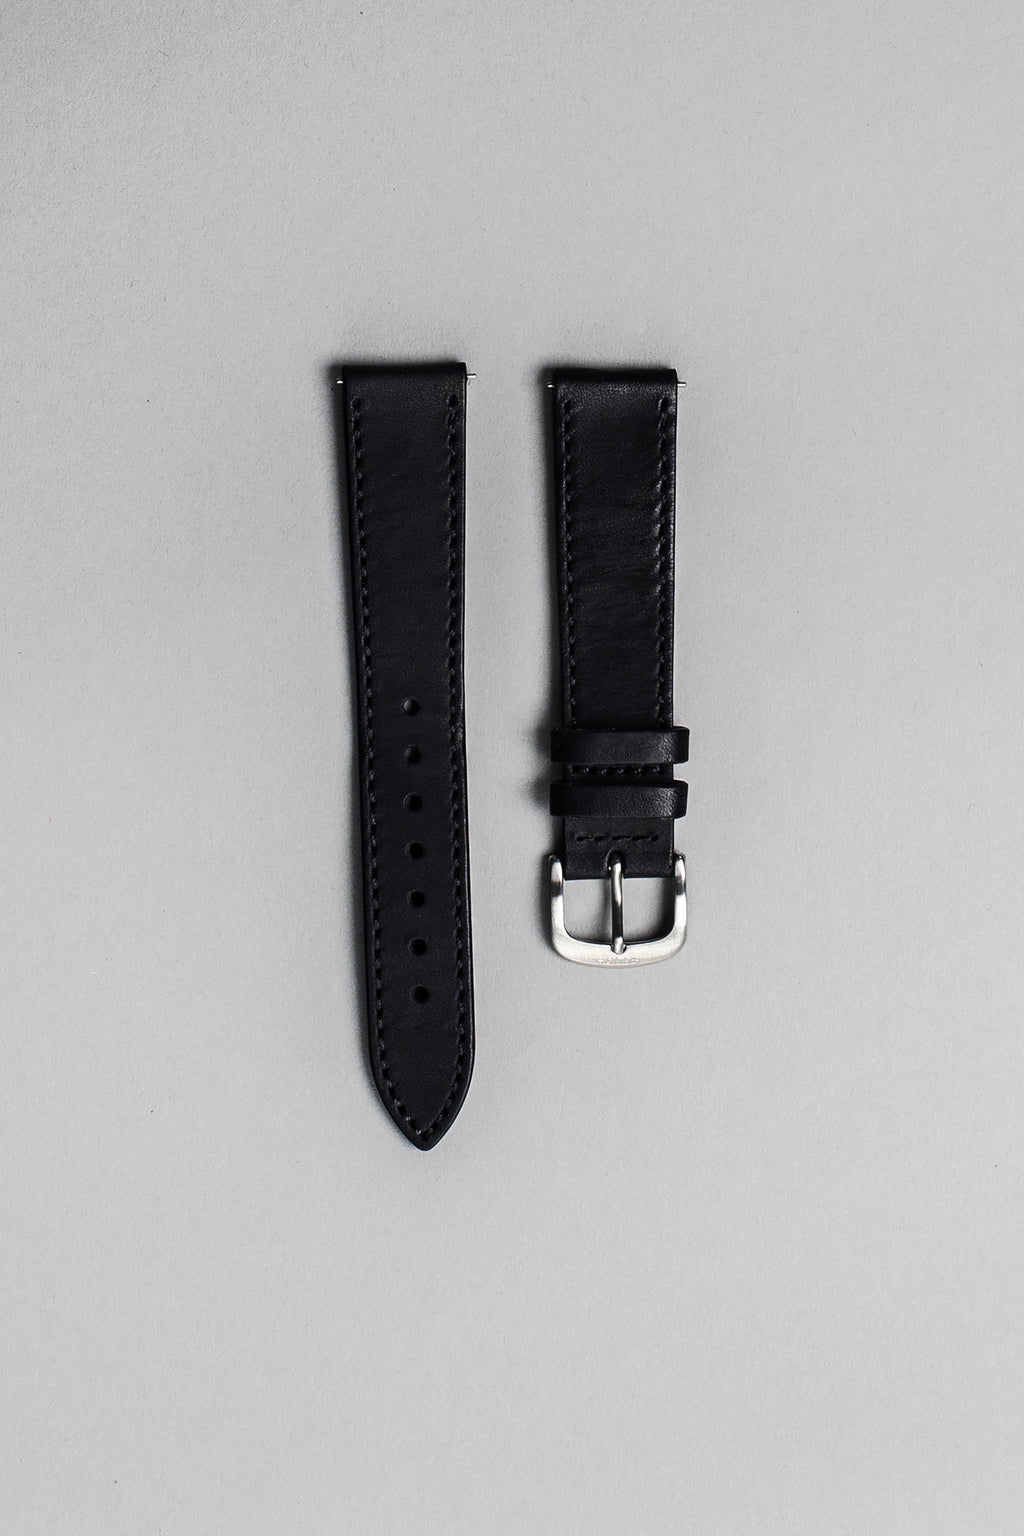 The black Italian veg tan strap with brushed buckle. 18mm